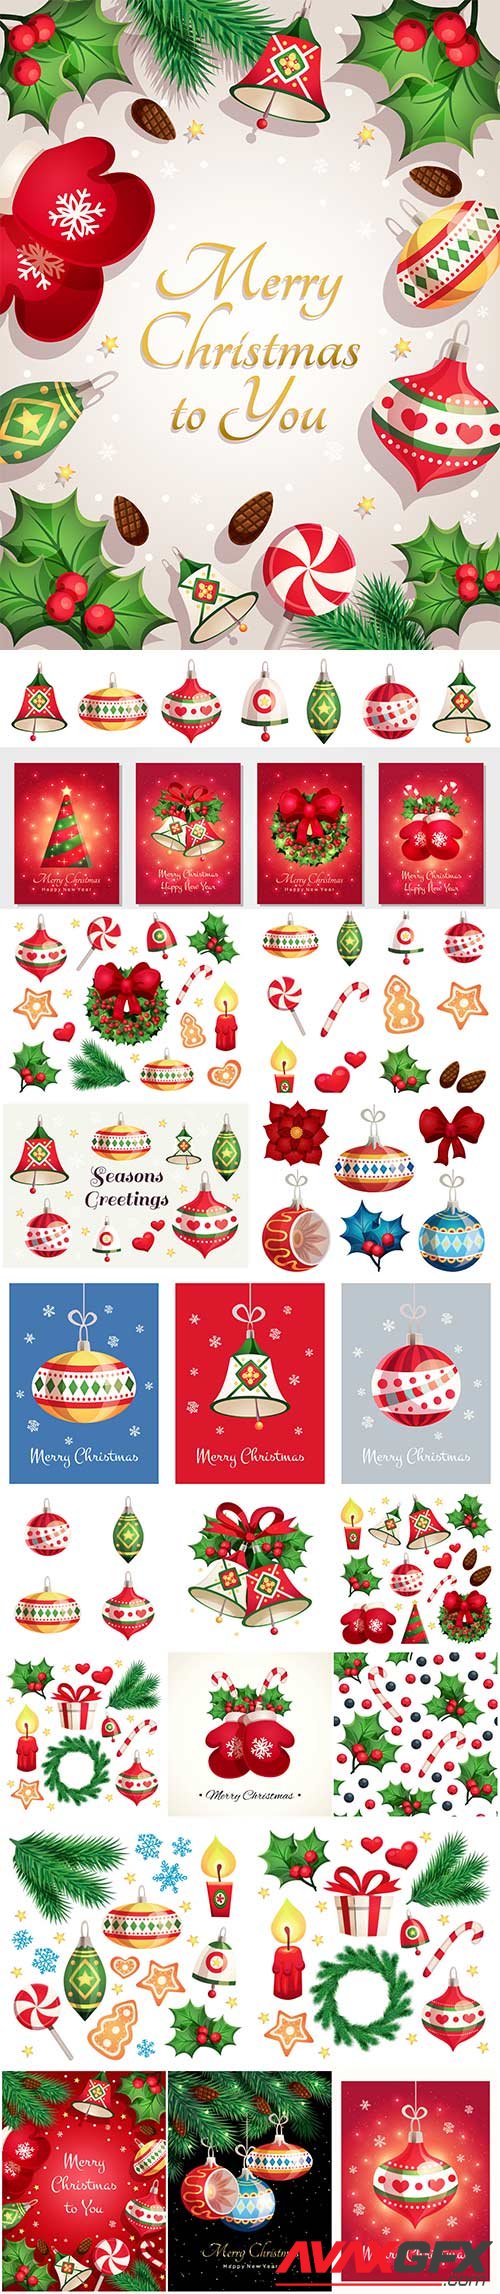 Merry christmas and happy new year card with decorative elements, christmas toys, bells, snowflakes and stars